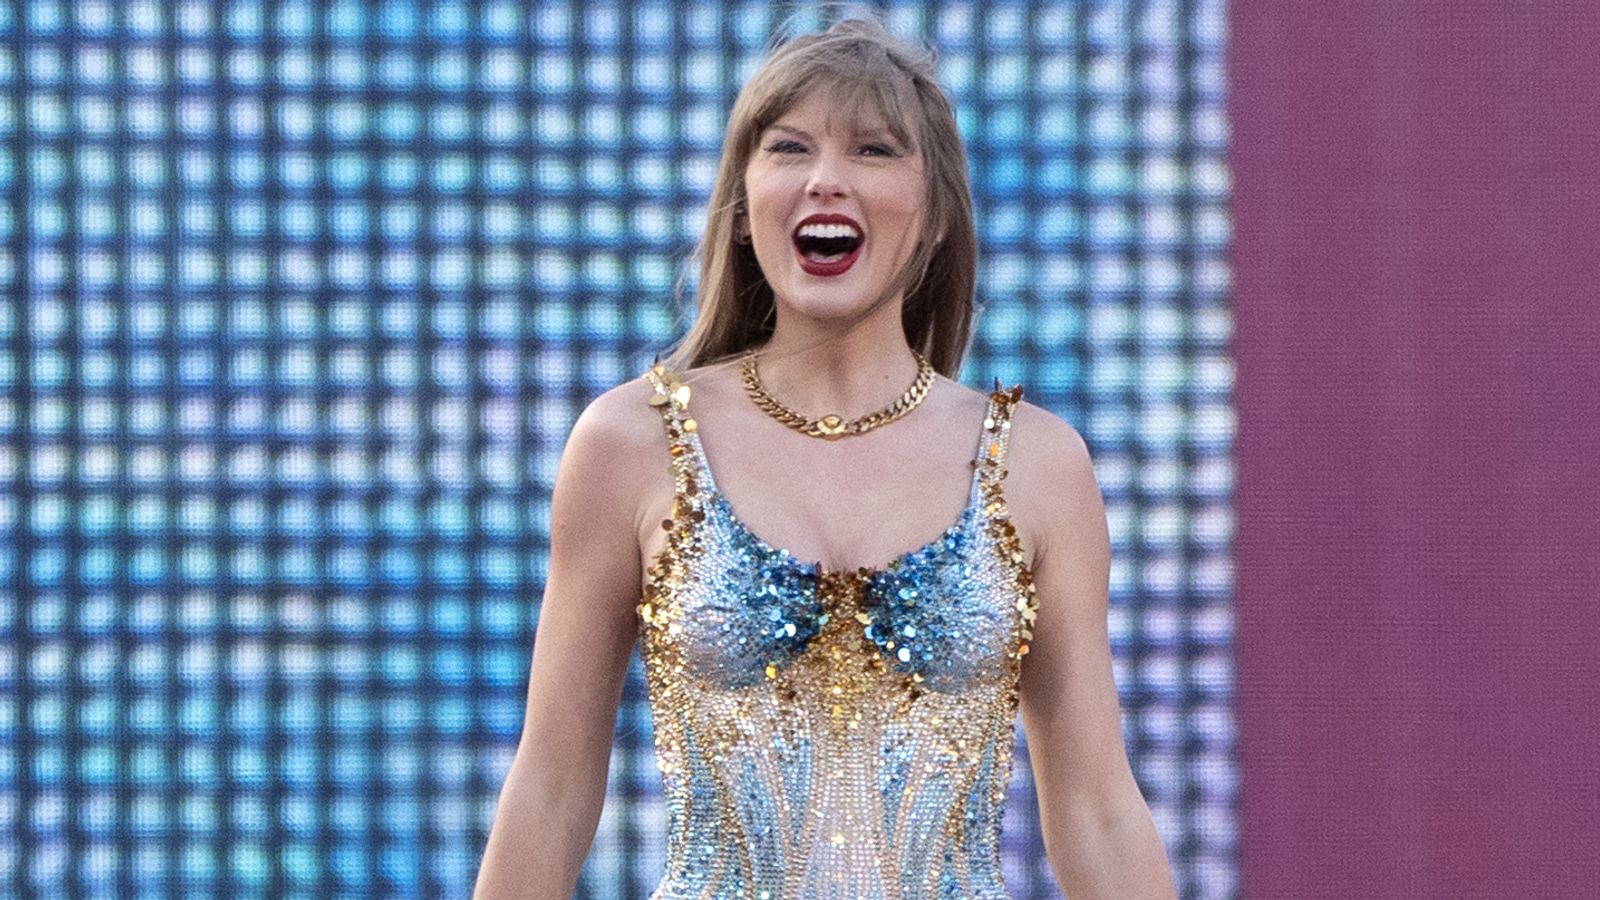 Taylor Swift Eras Tour: Final UK shows at London's Wembley Stadium 'will boost economy by £300m'